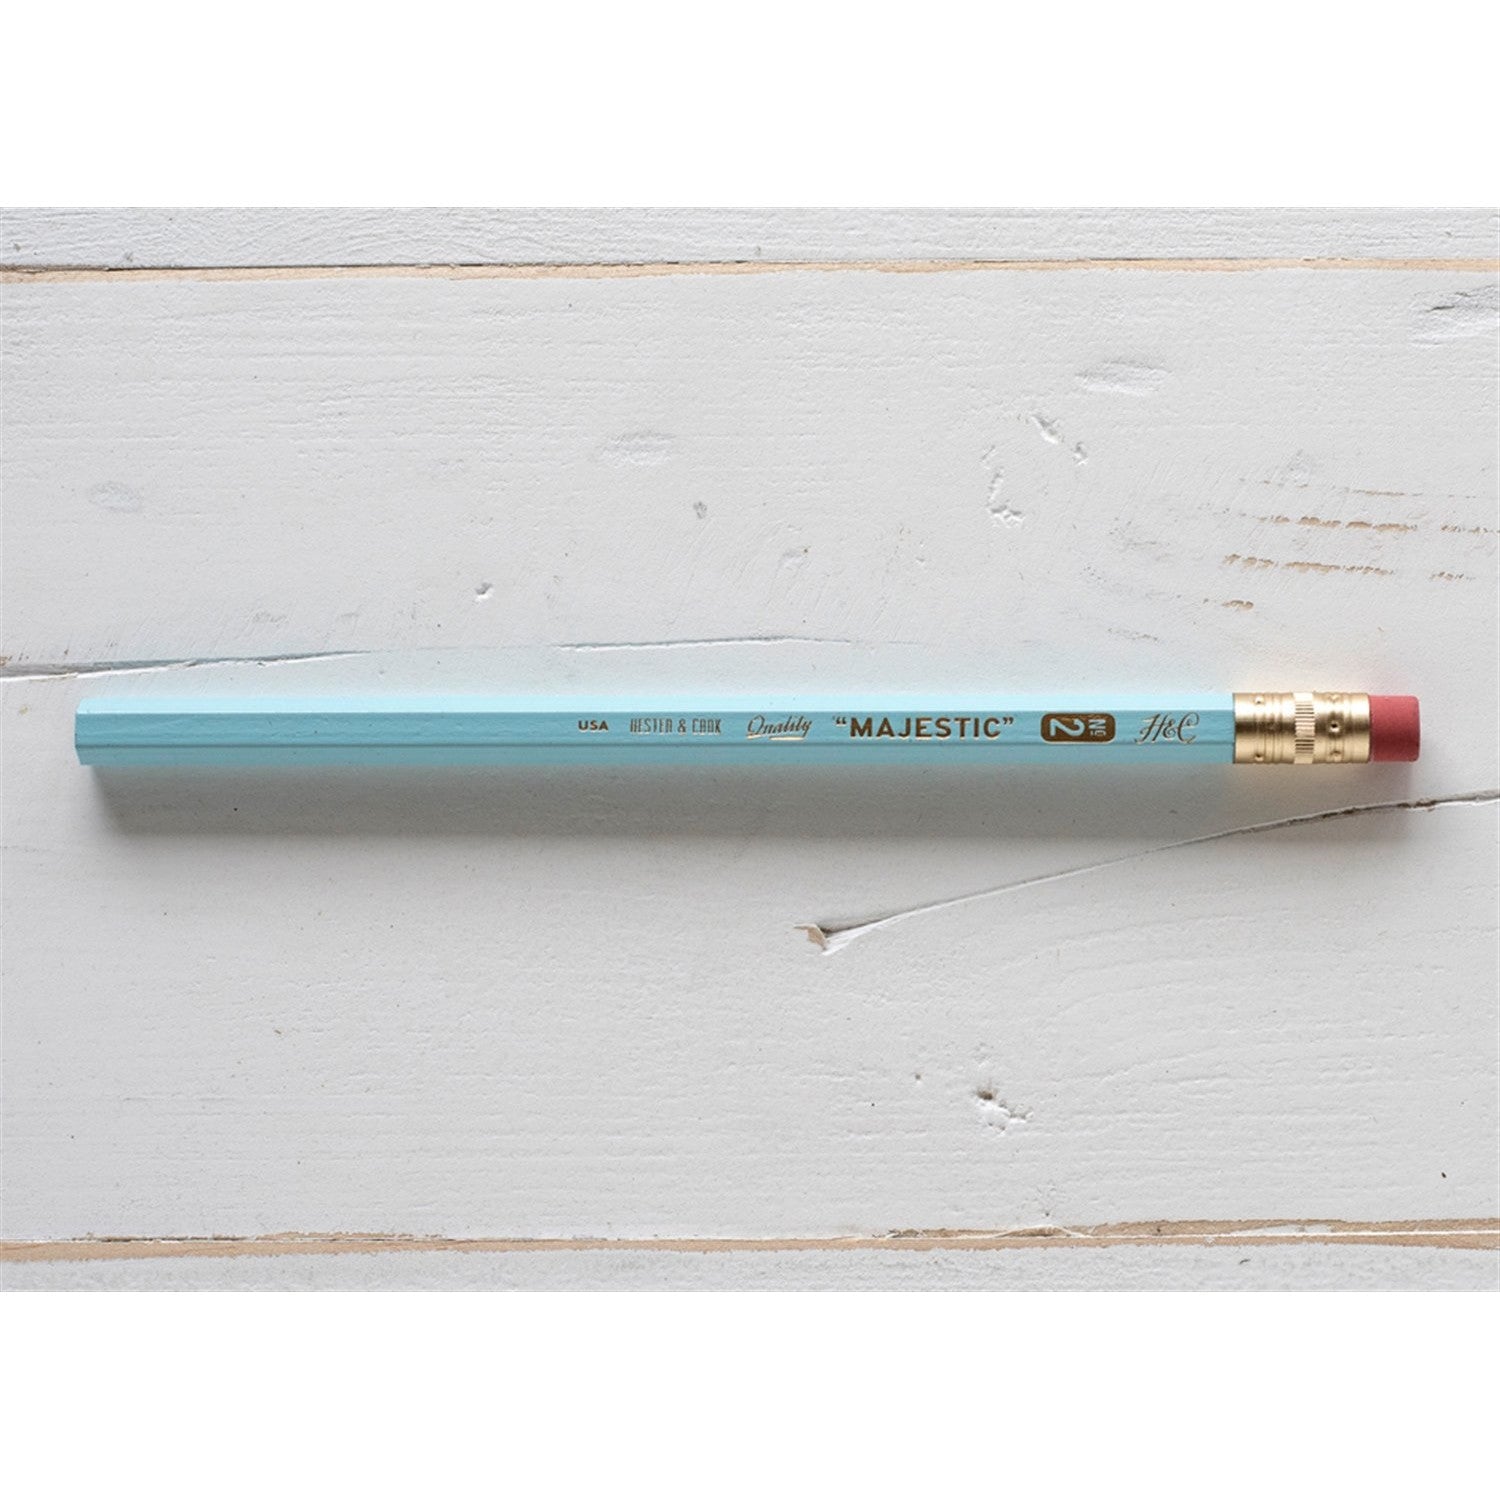 A Hester &amp; Cook jumbo hex pencil with a gold tip on a wooden surface.